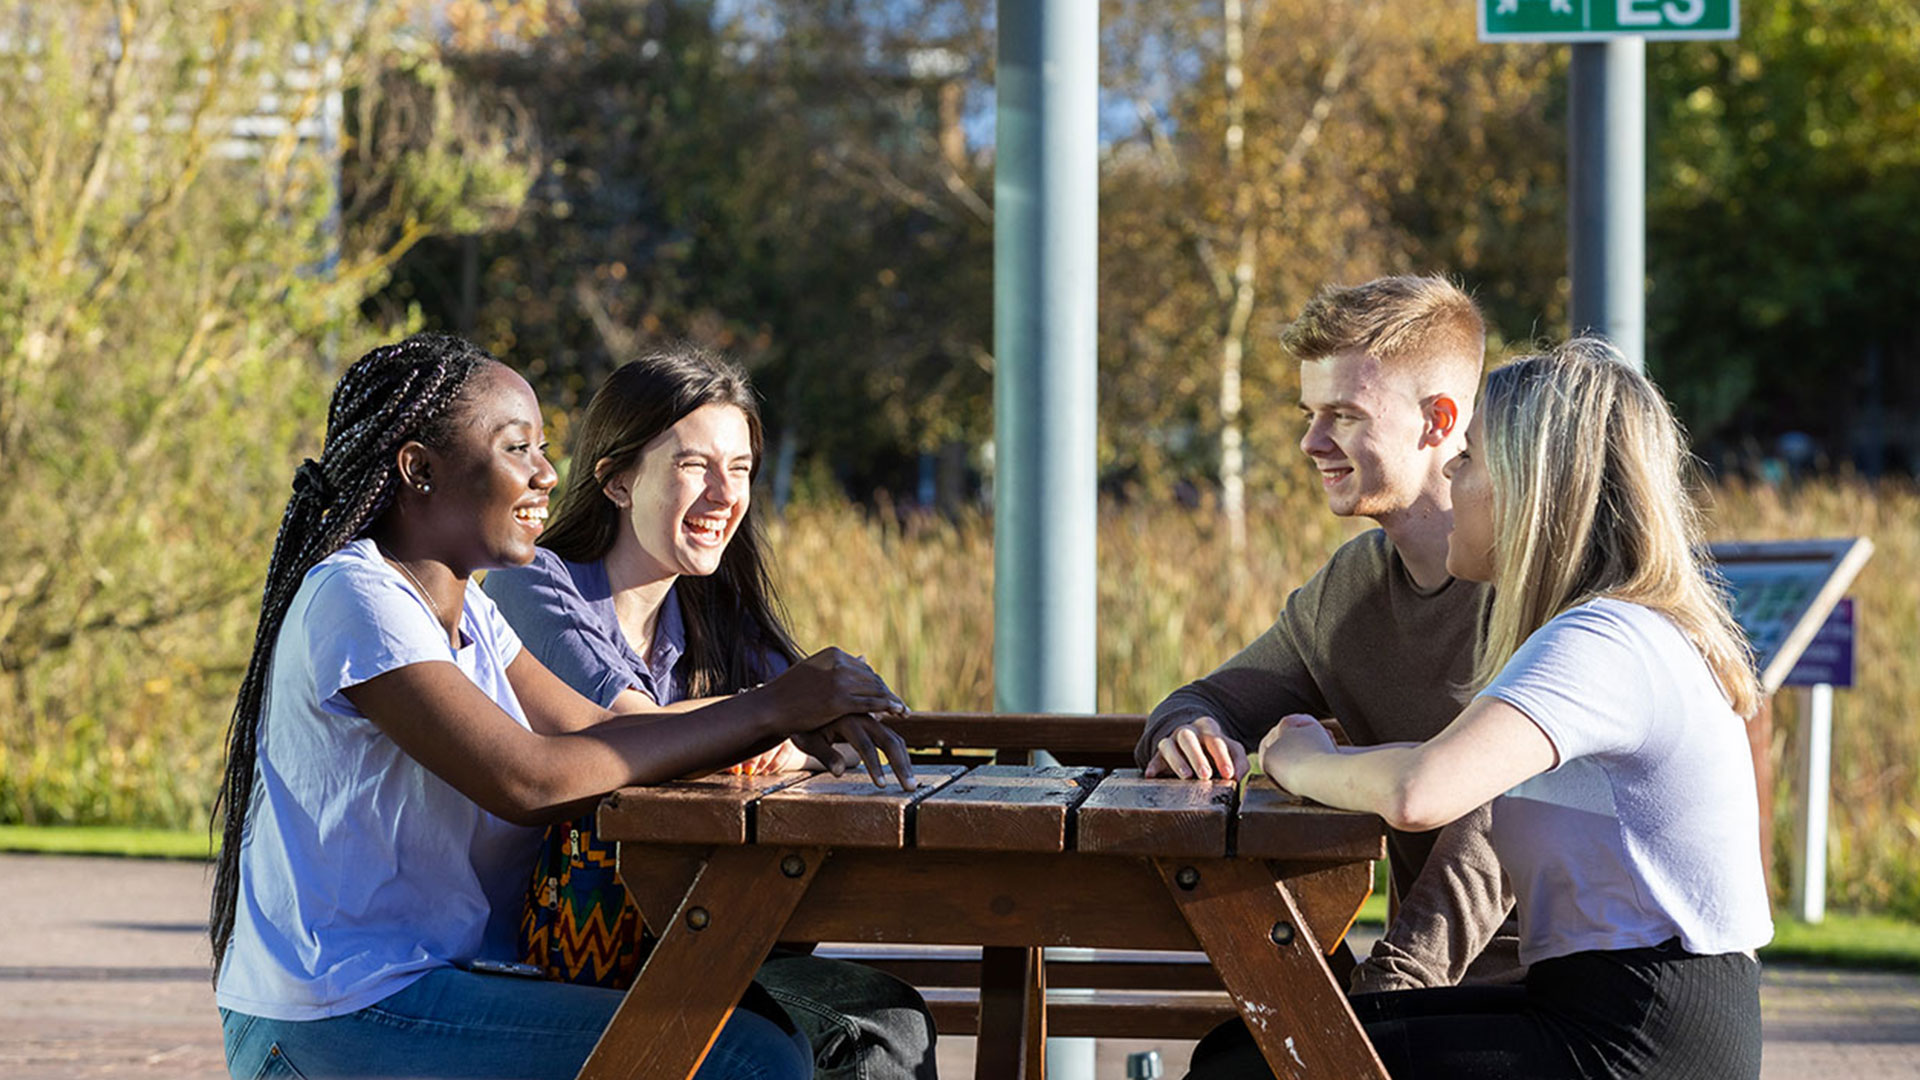 Students sitting outside on a picnic bench laughing